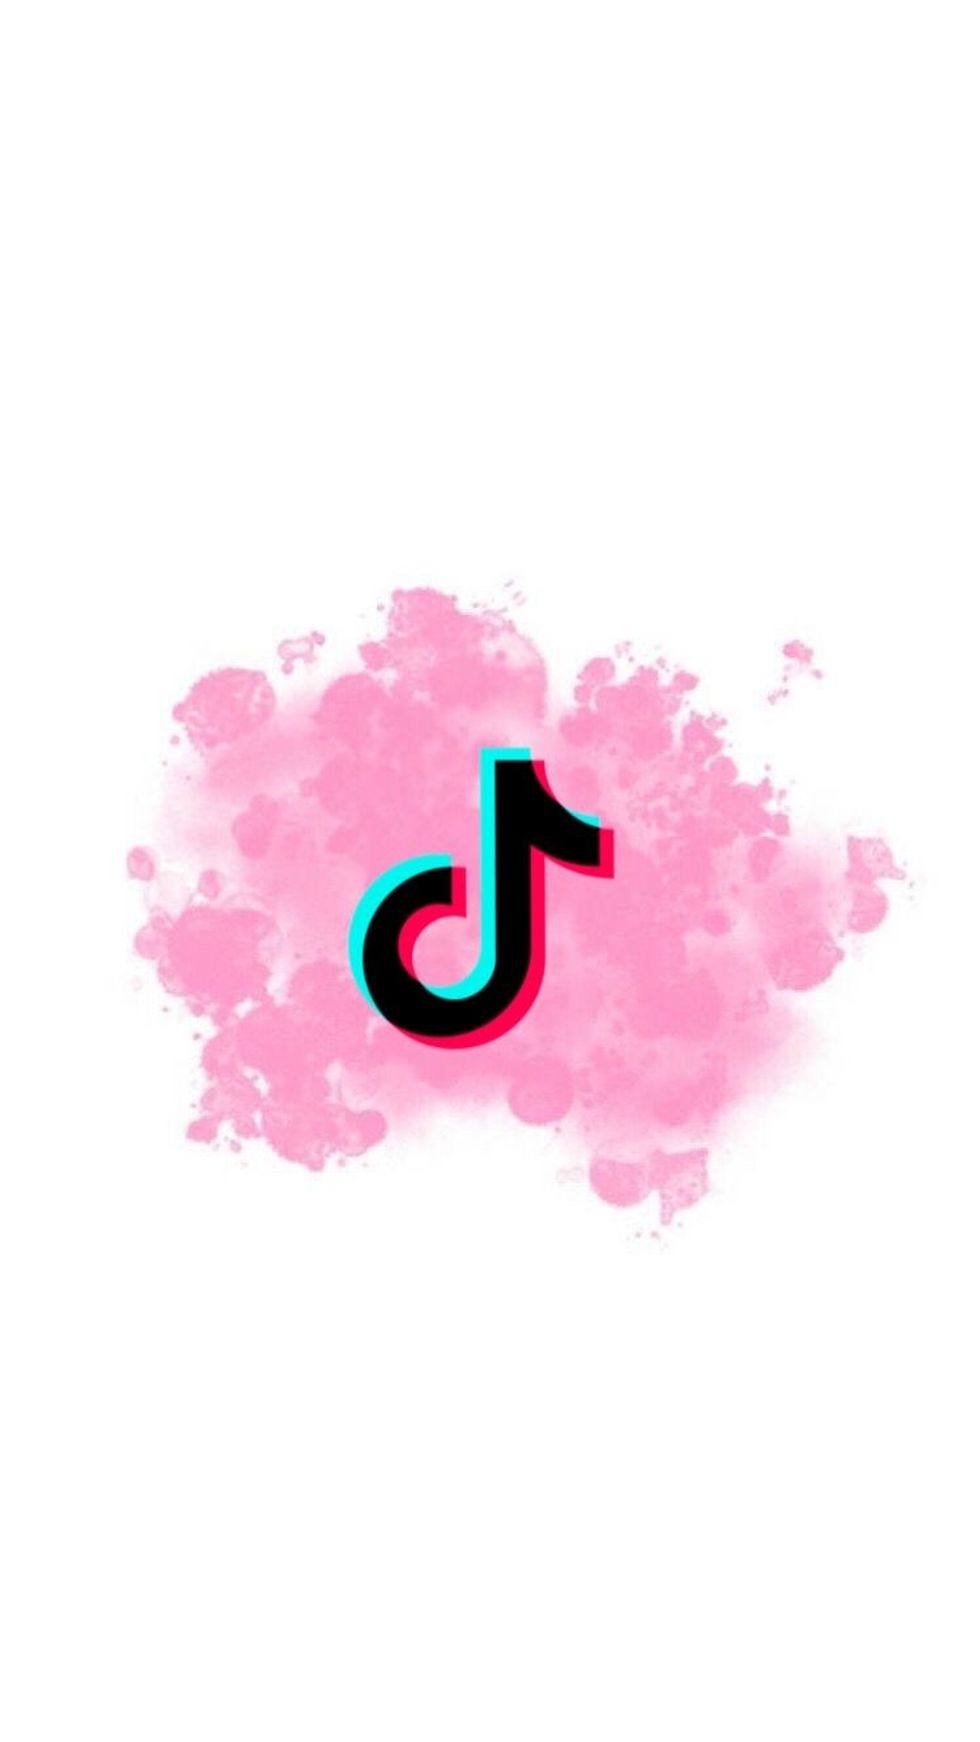 5 Signs That You Are Addicted To TikTok